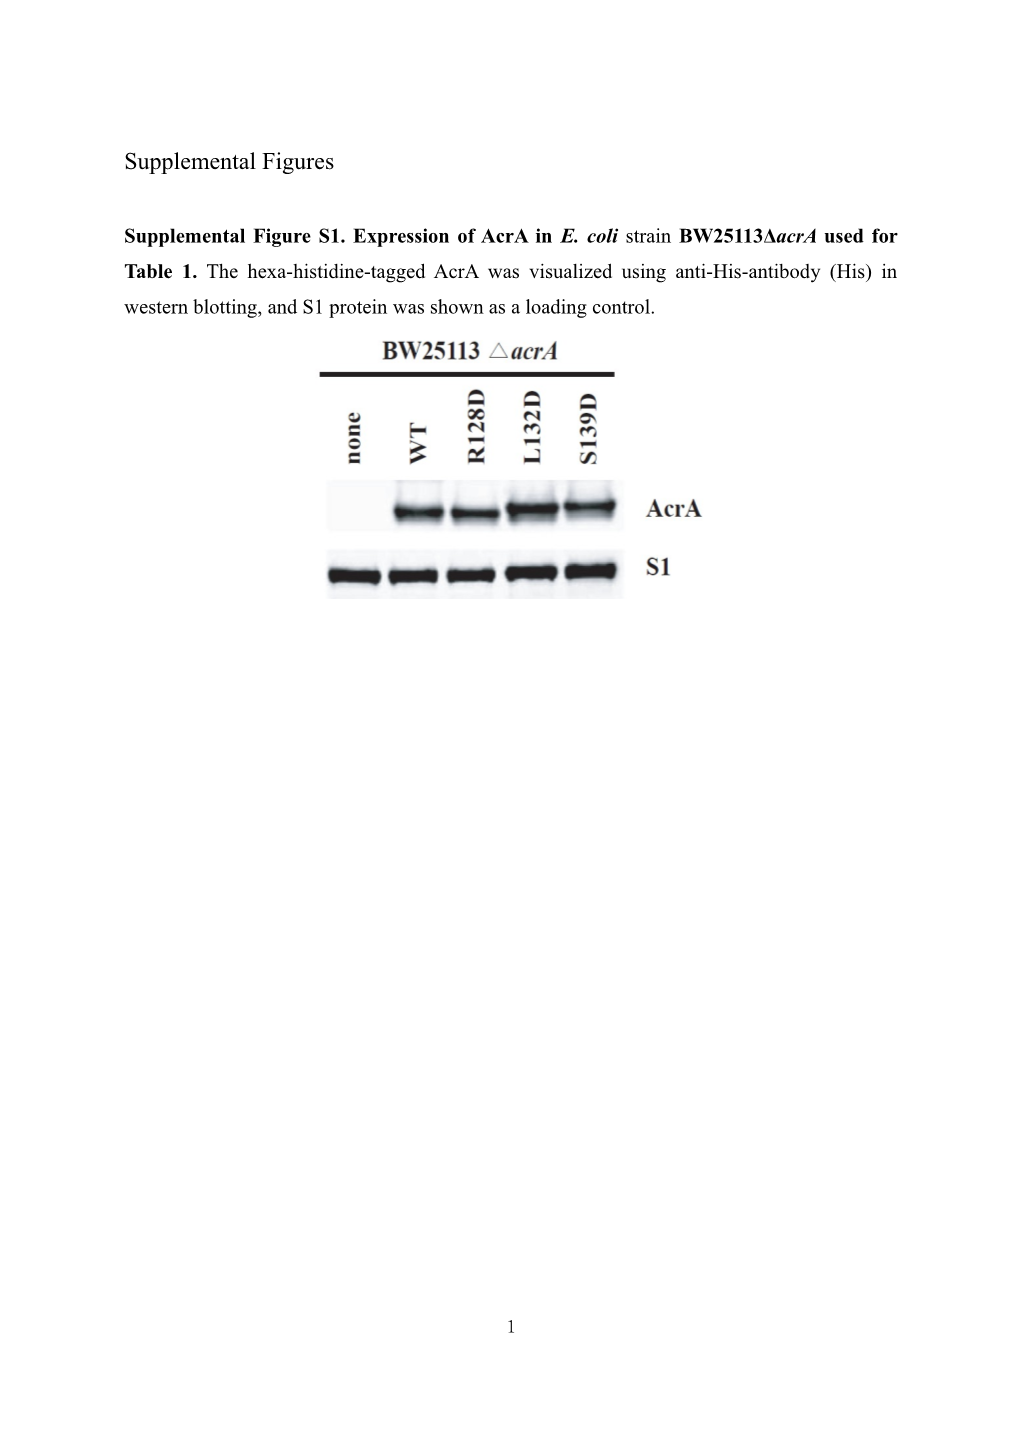 Supplemental Figure S2. Circular Dichroism Spectra Form E. Coli Acra Mutant Proteins For